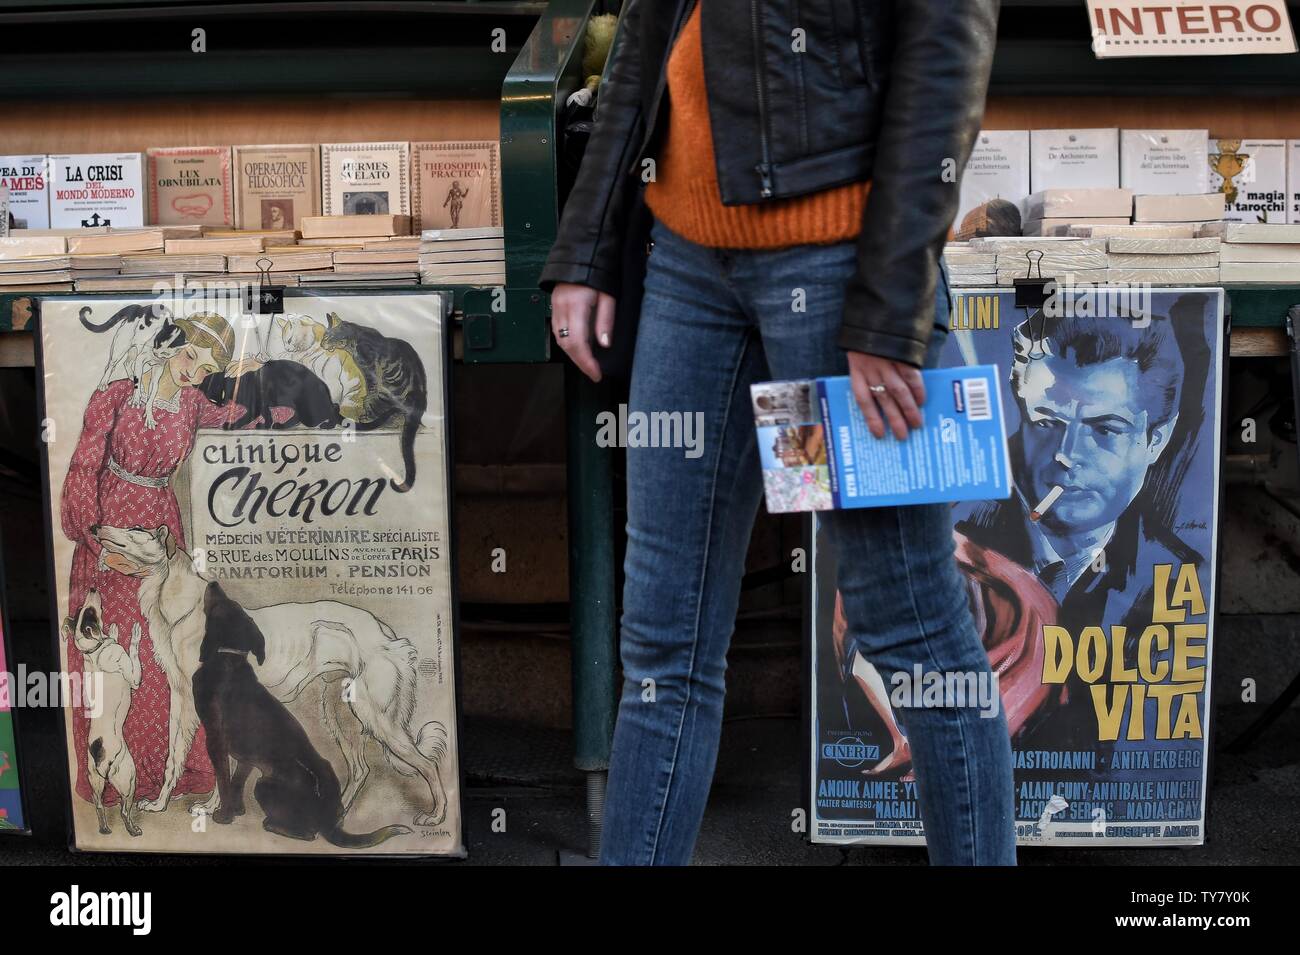 Artpirnt „Clinique Cheron” by Steinlen and a poster from Fellini’s „La Dolce Vita” on book stand in Rome. Stock Photo